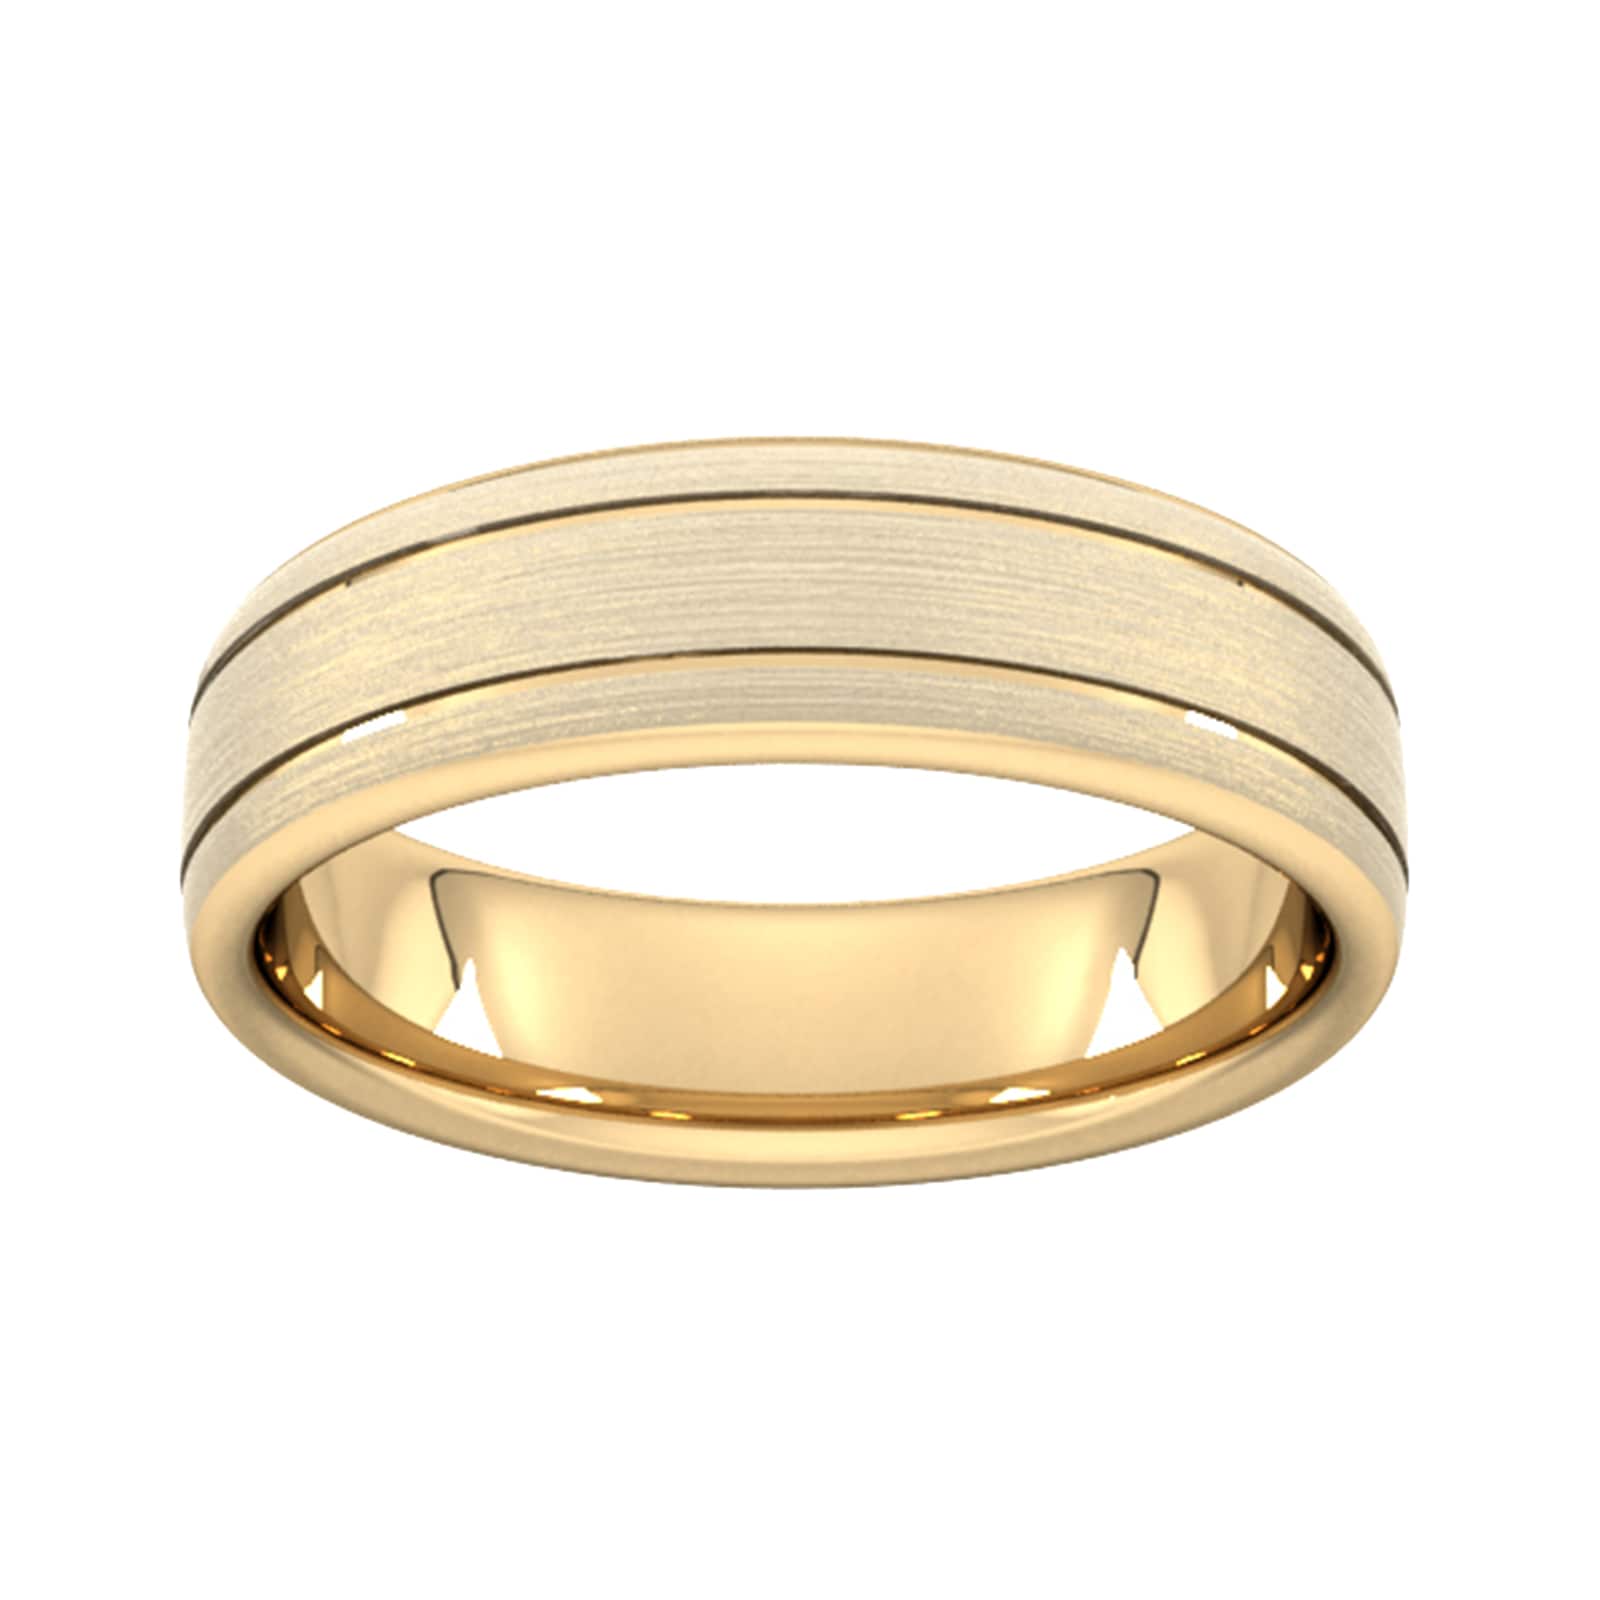 6mm Slight Court Standard Matt Finish With Double Grooves Wedding Ring In 9 Carat Yellow Gold - Ring Size S